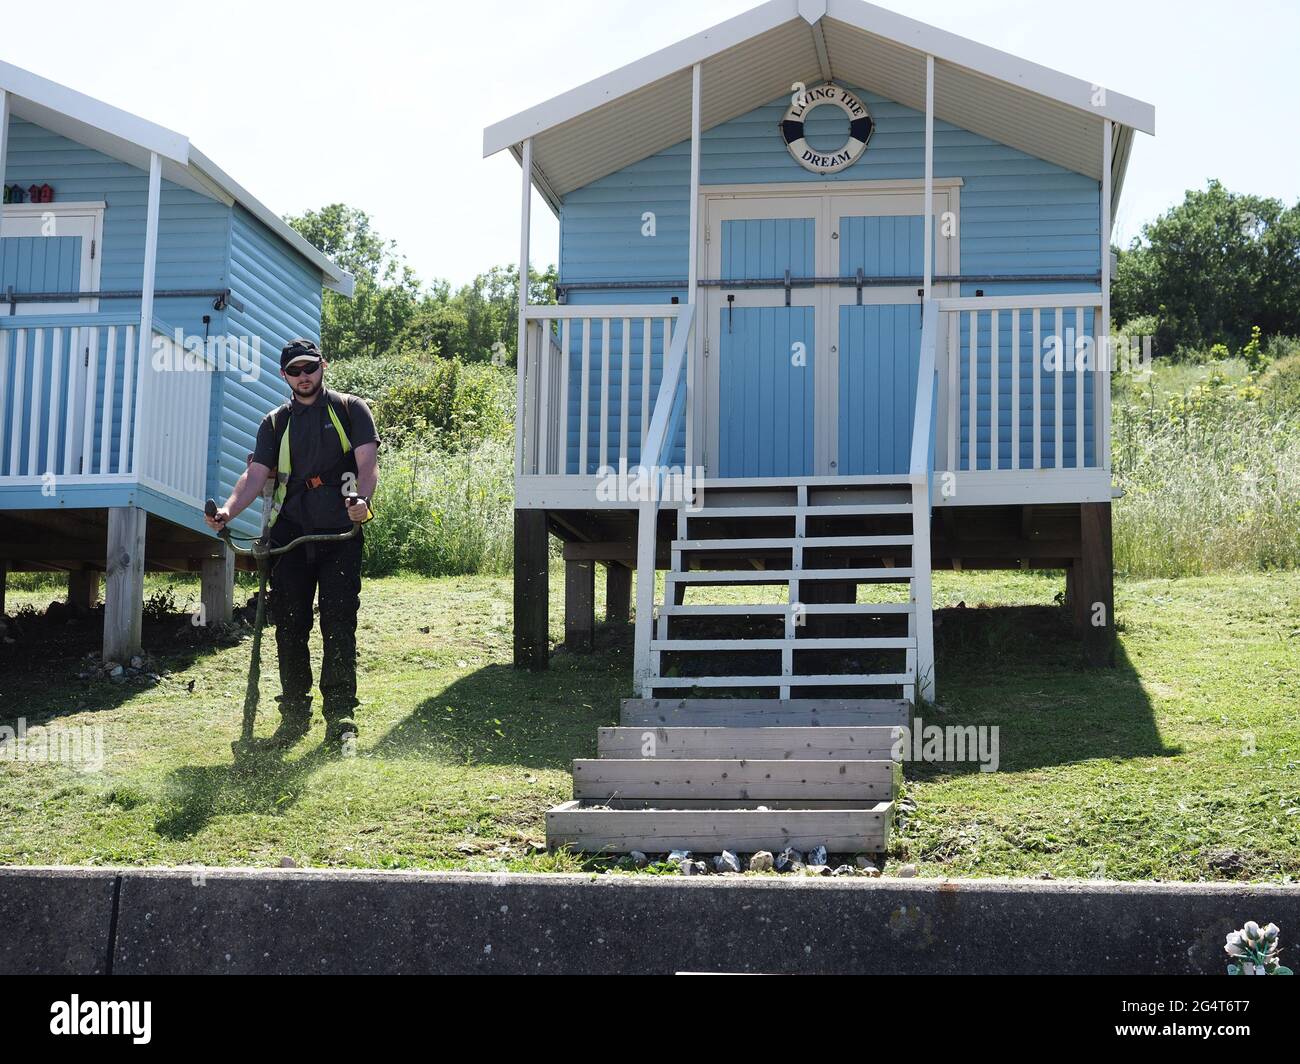 Minster on Sea, Kent, UK. 23rd June, 2021. UK Weather: a sunny & warm afternoon in  Minster on Sea, Kent. A council worker strims the grass in front of a beach hut called 'Living the Dream'. Credit: James Bell/Alamy Live News Stock Photo